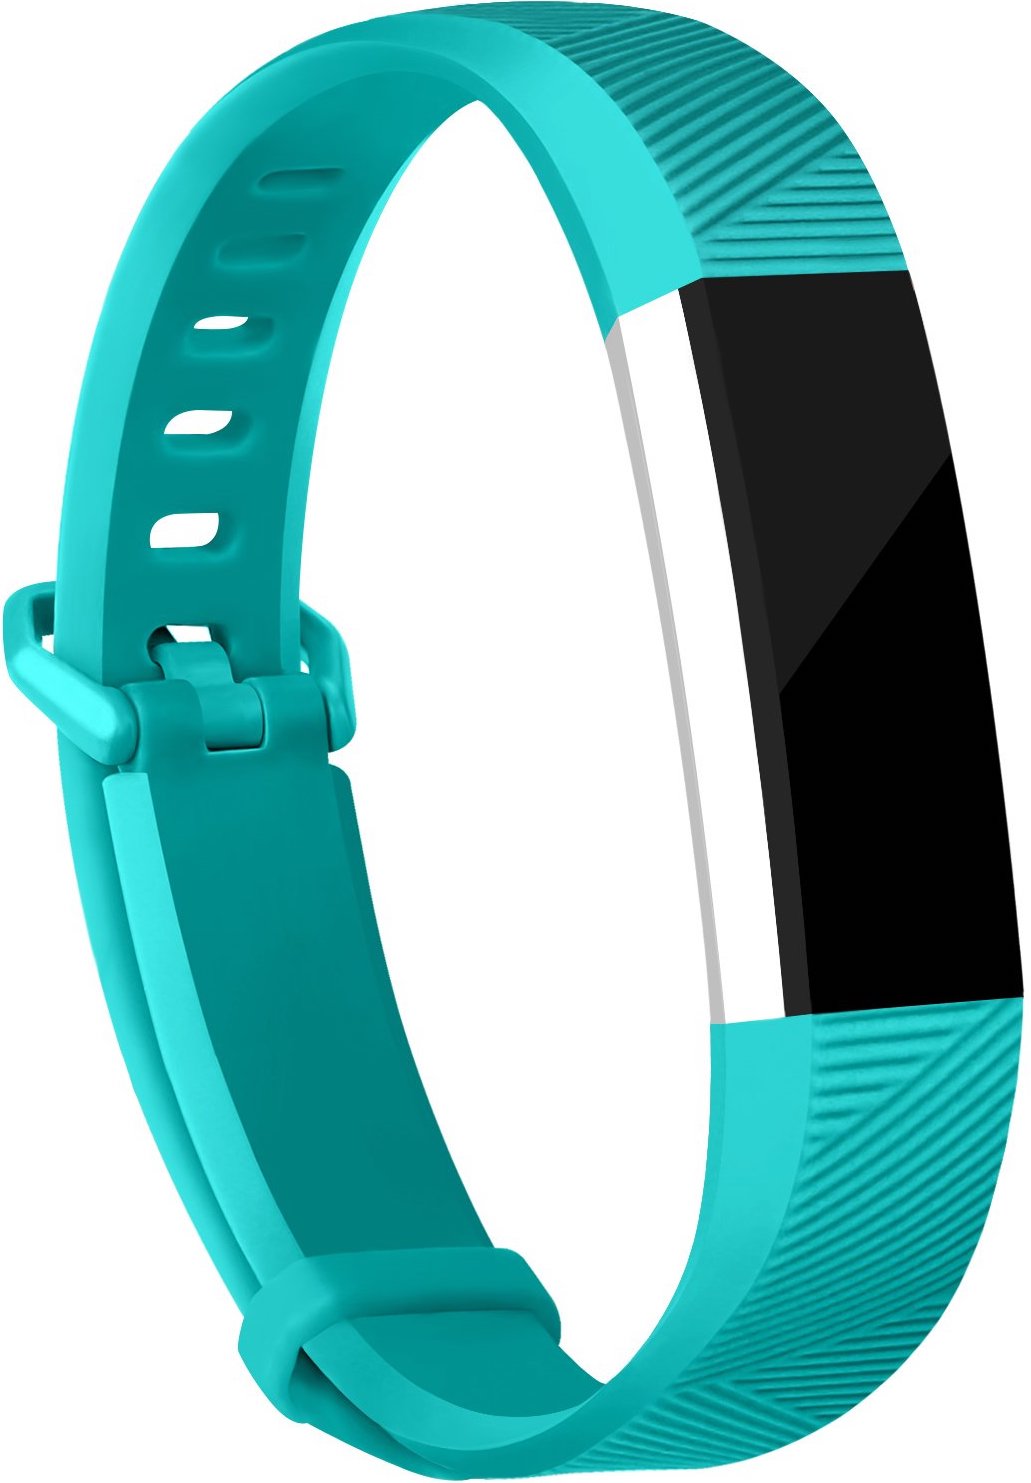 iGK workout strap for Fitbit.